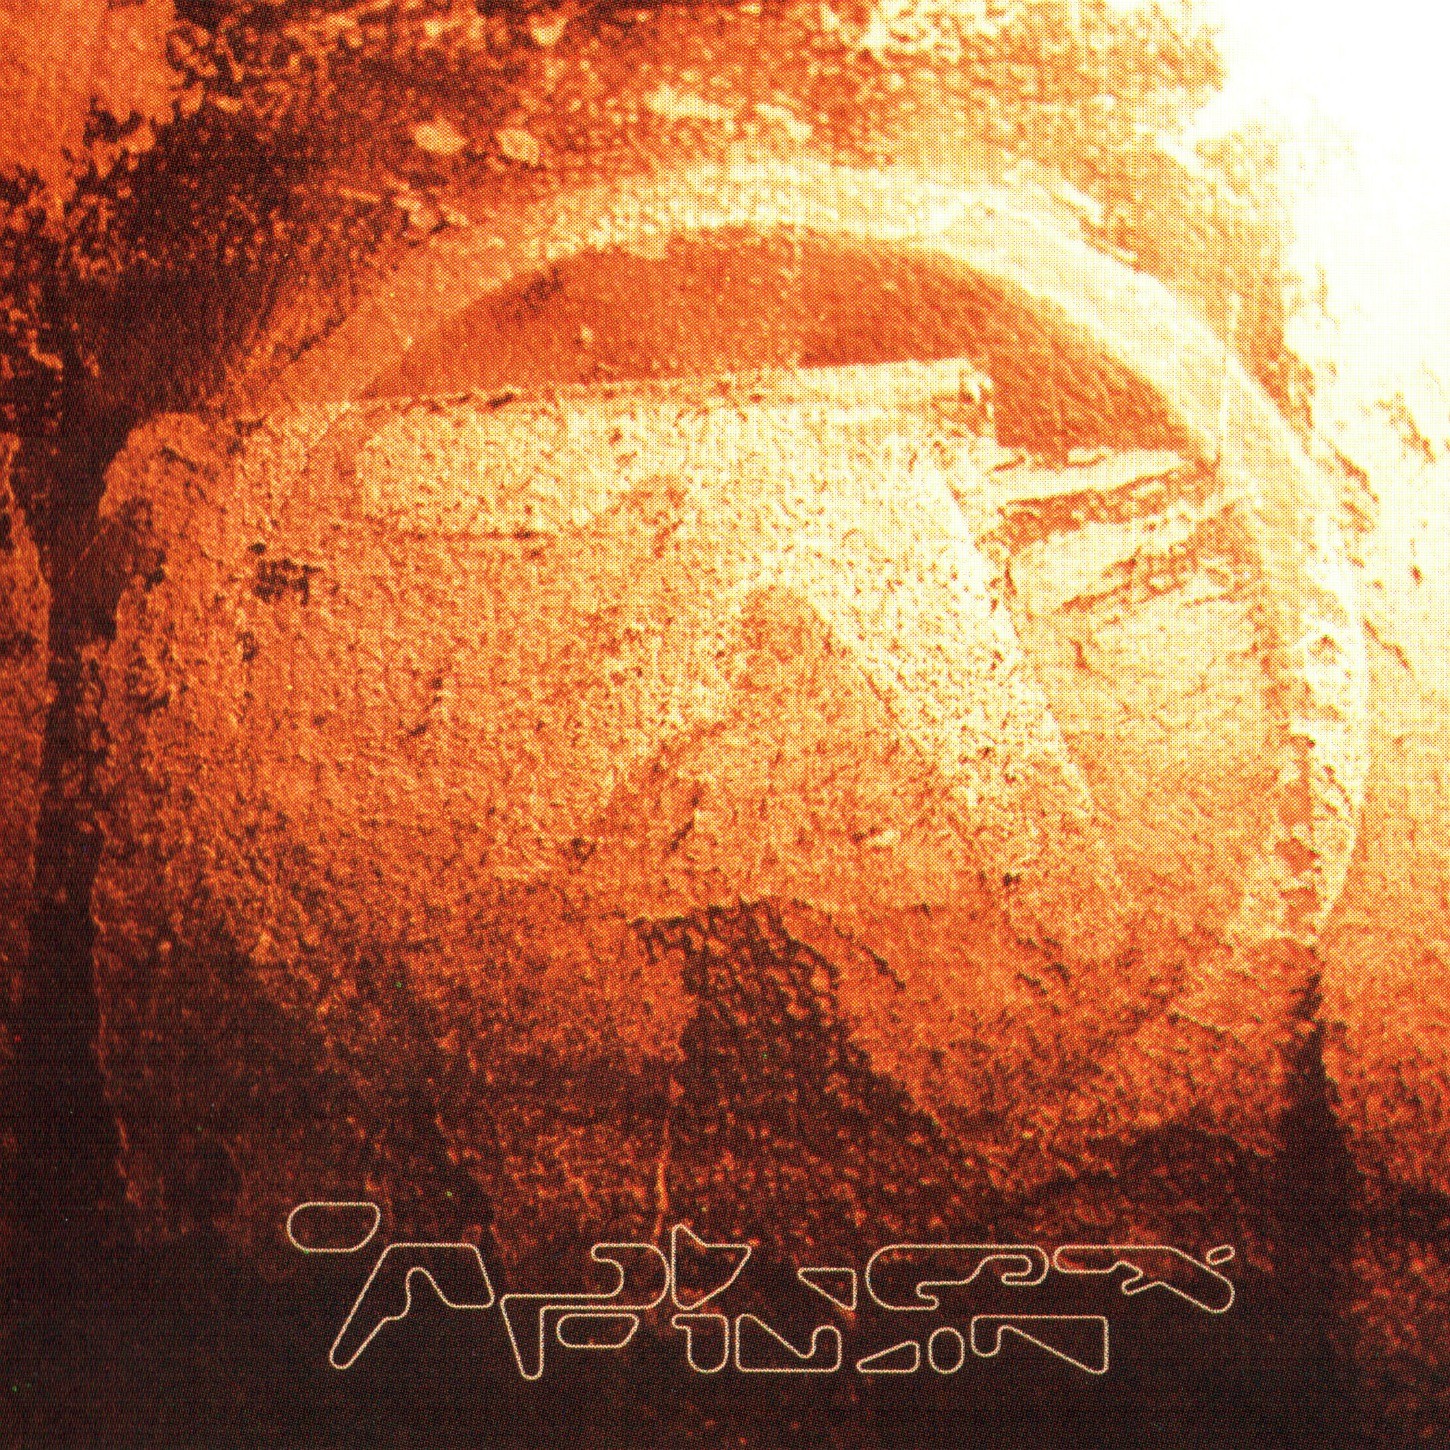 Select Ambient Works Volume 2 by Aphex Twin